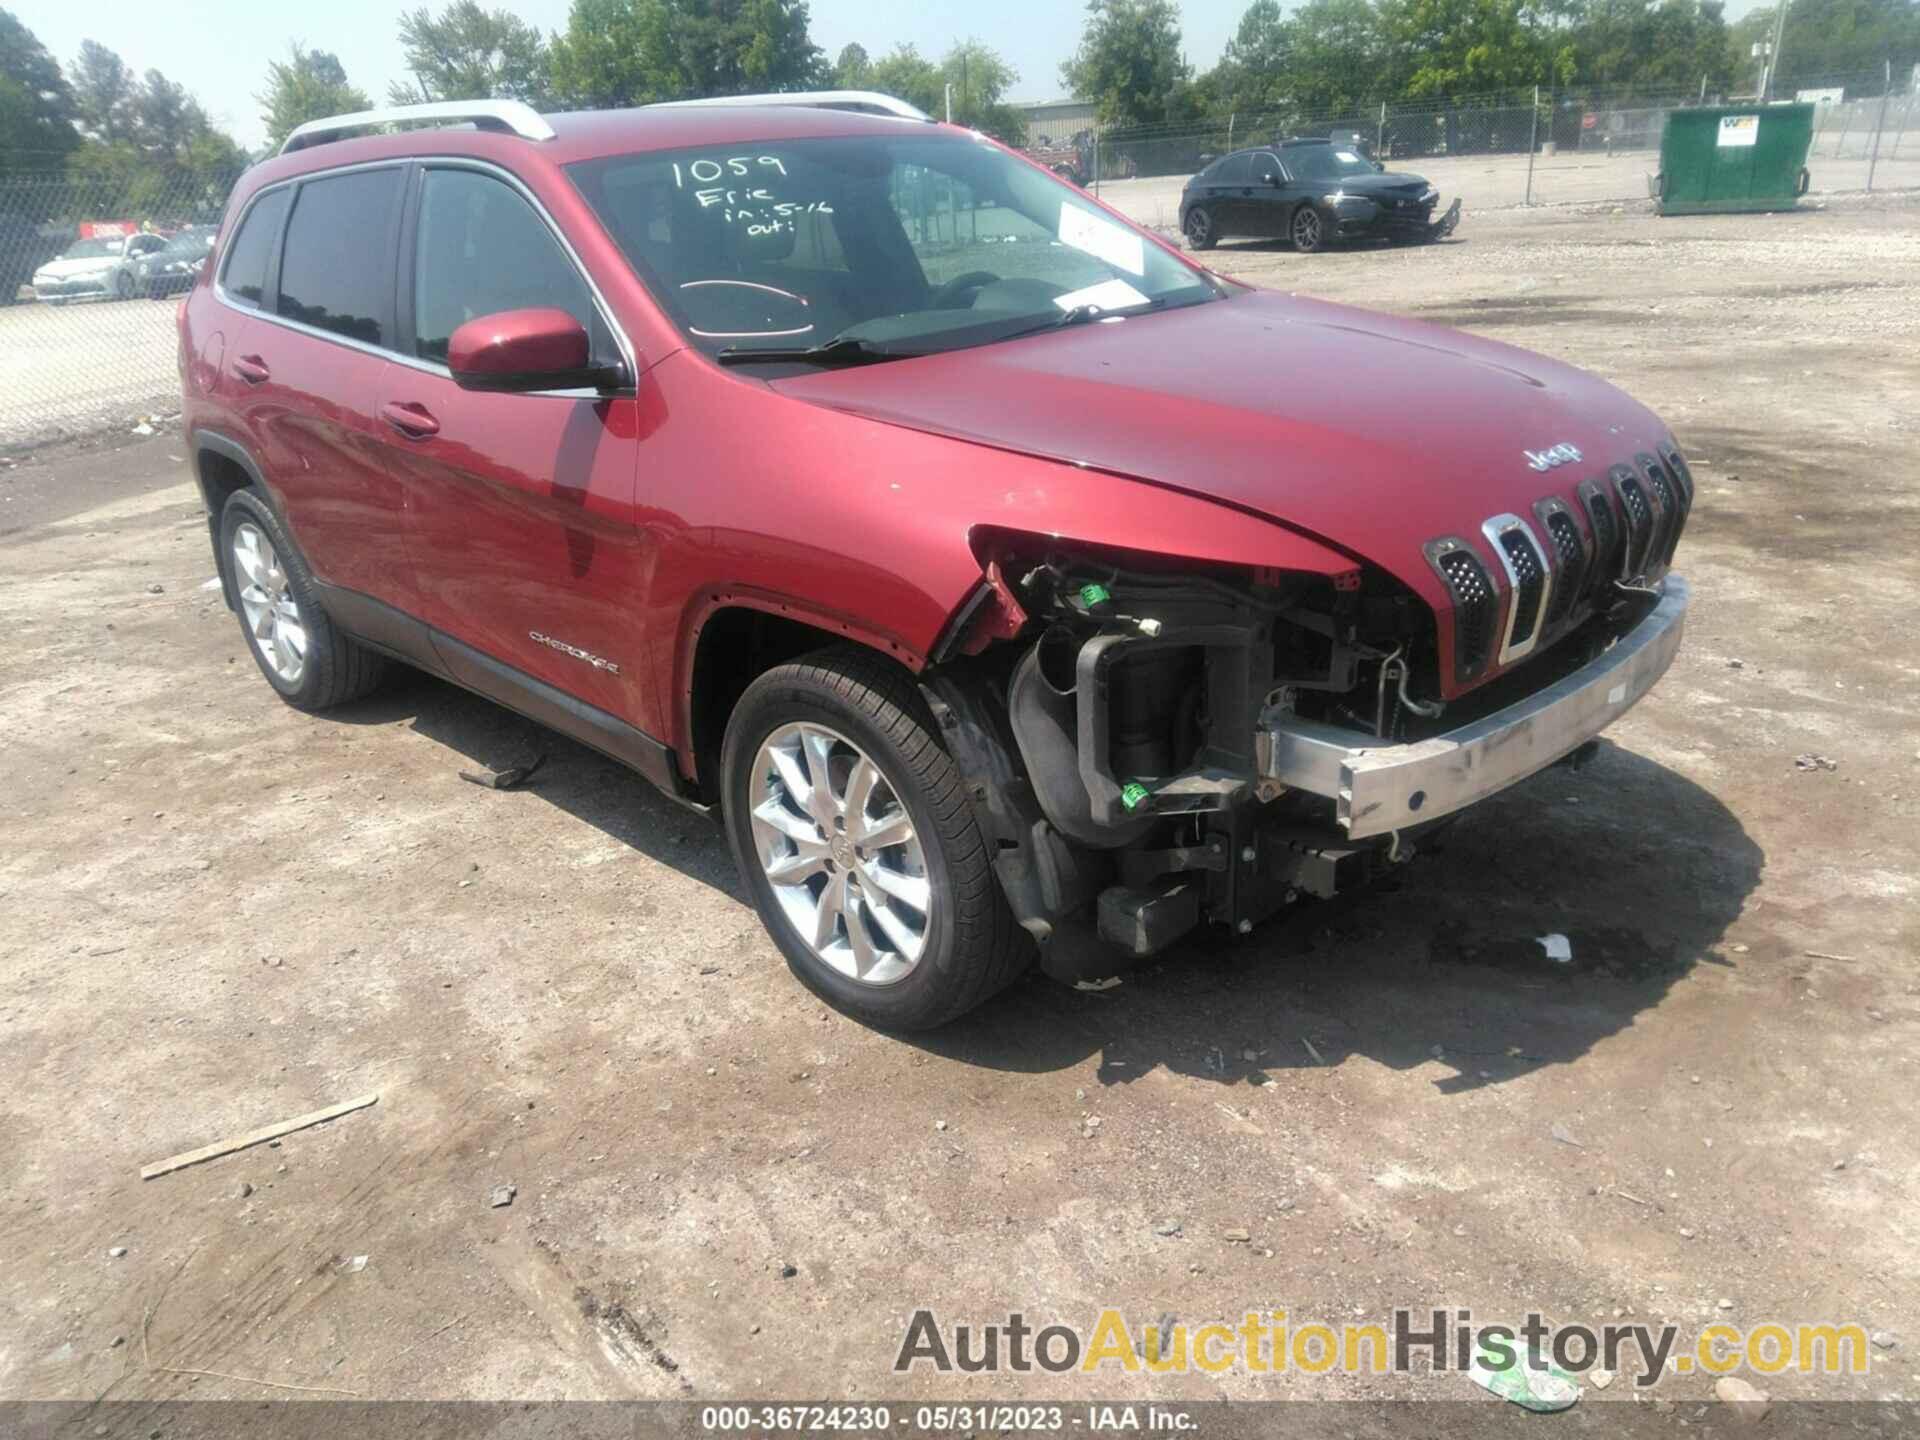 JEEP CHEROKEE LIMITED, 1C4PJLDS9FW516968